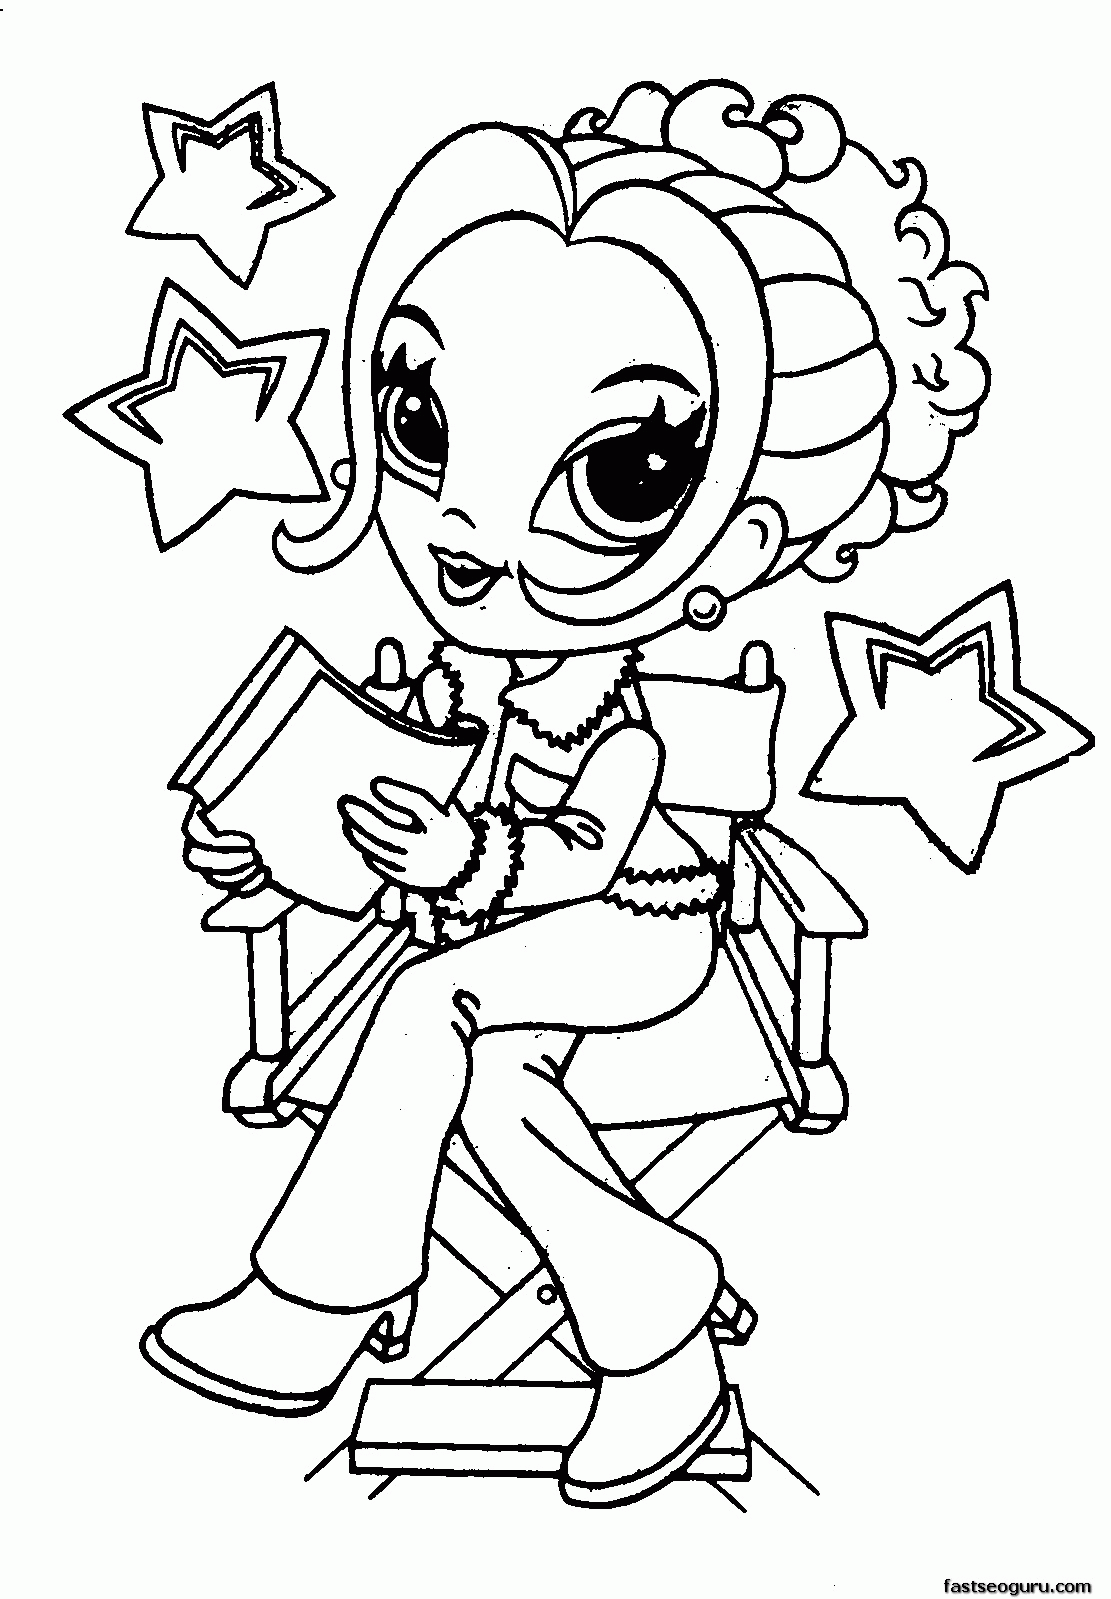 Printable Coloring Pages For Girls 10 And Up - Coloring Home